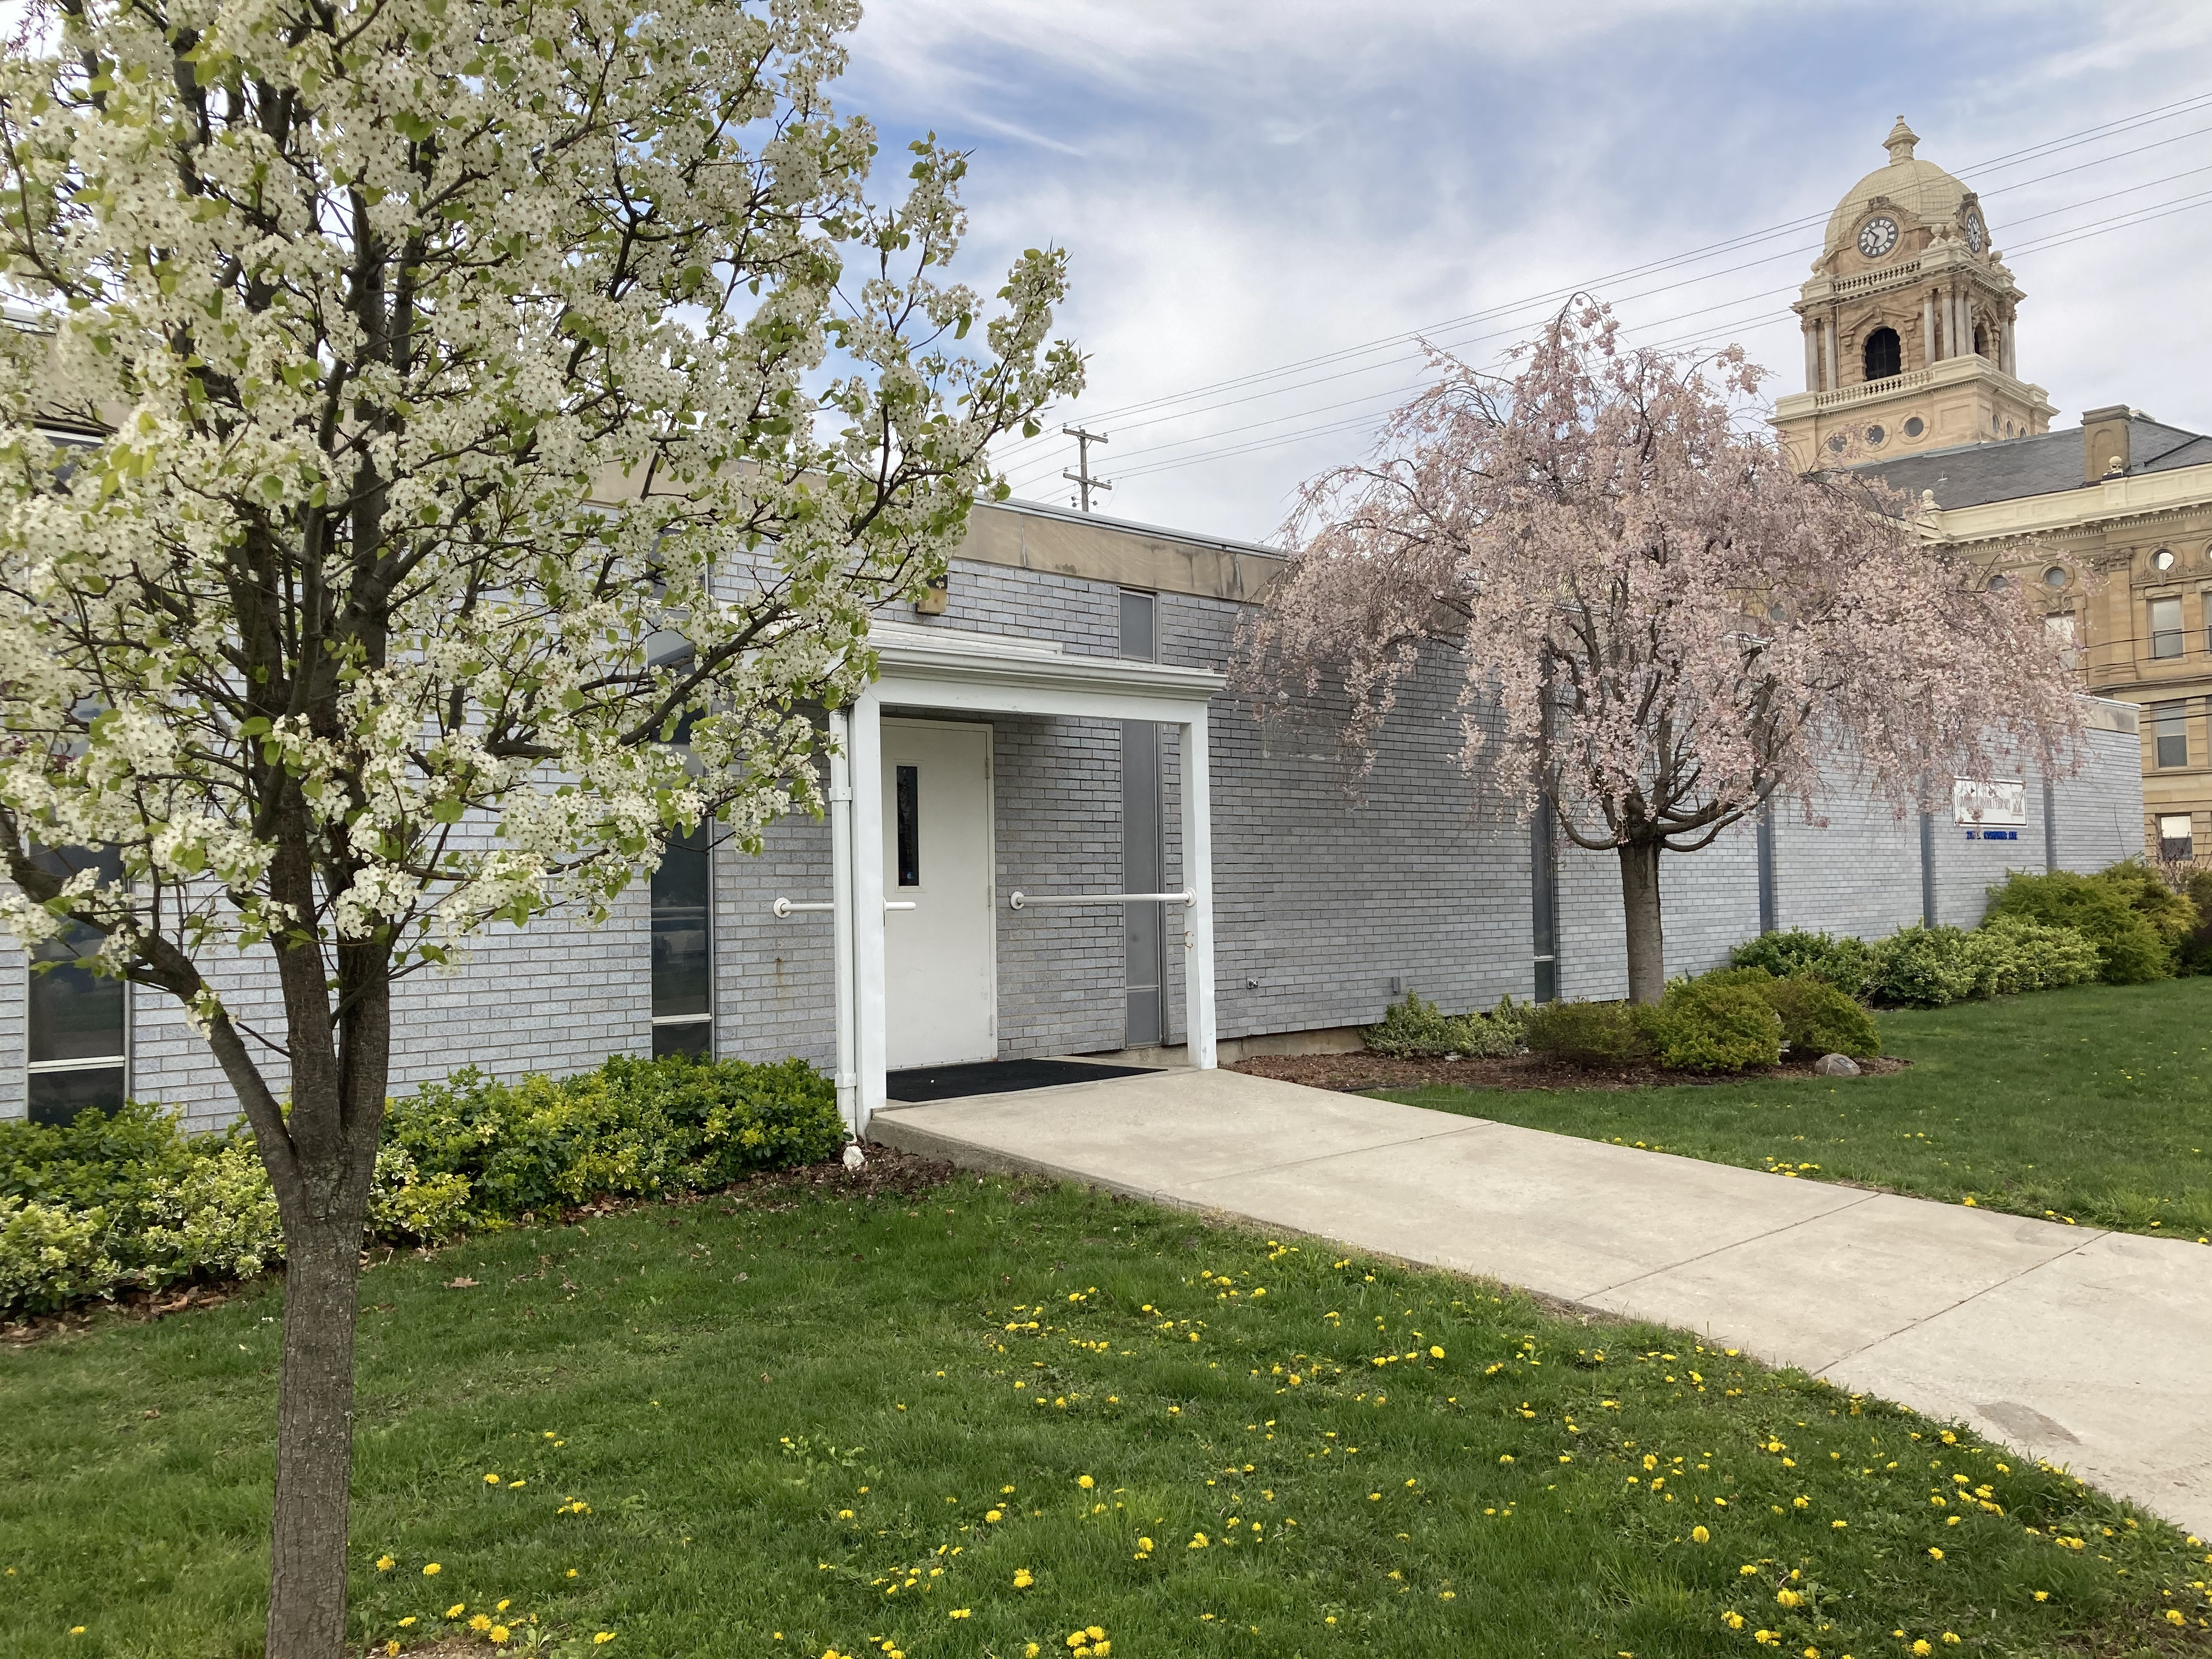 Administrative Office door with flowering trees and court house in the background